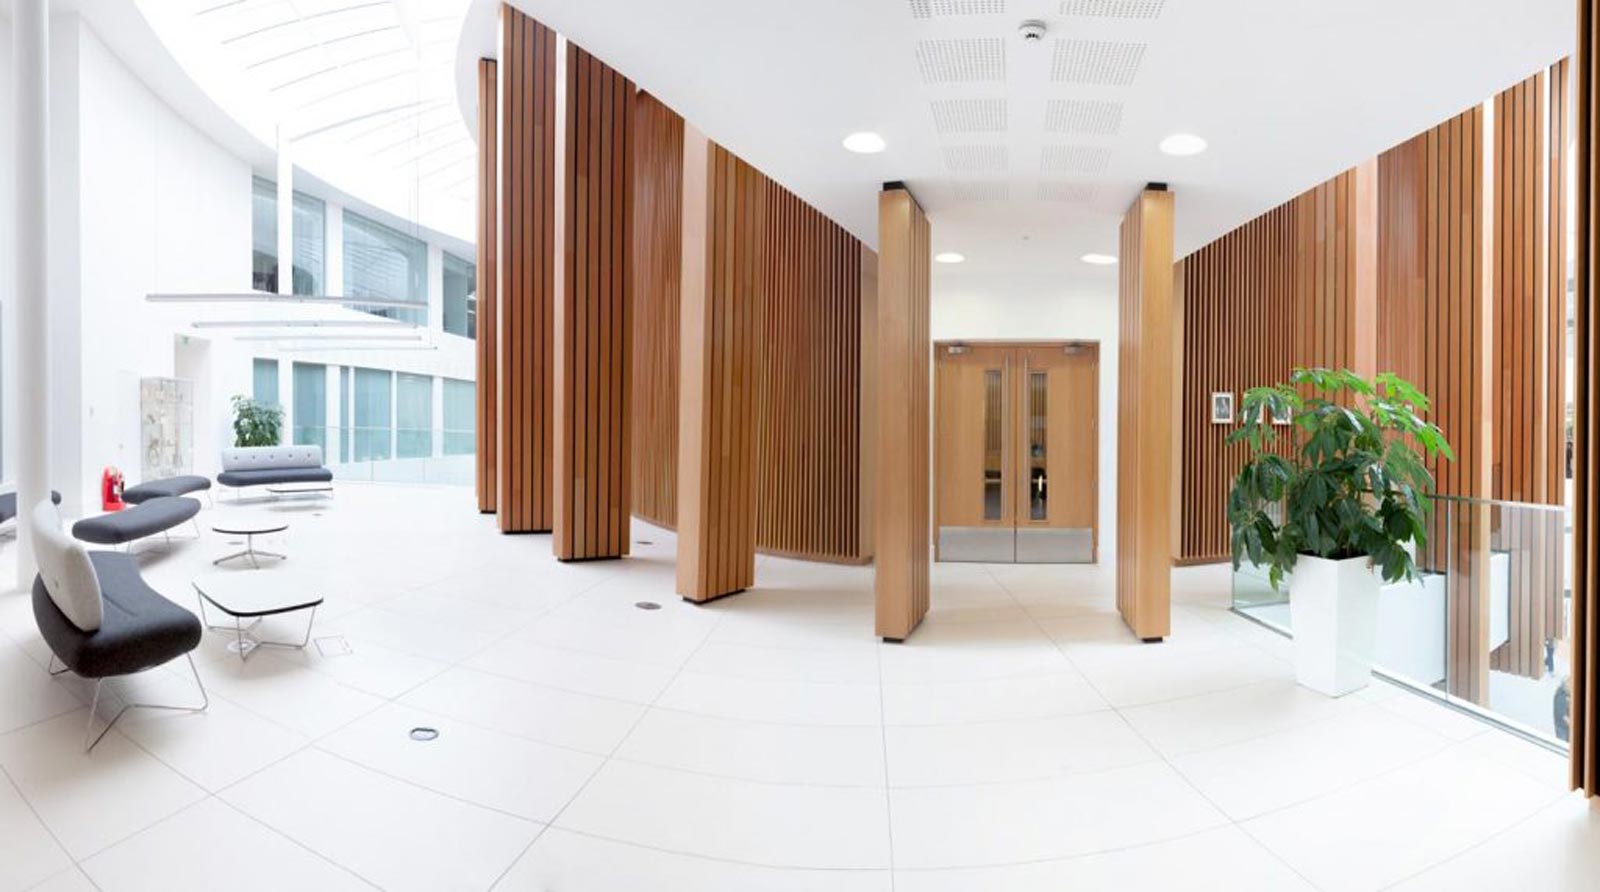 Interior of Derby City Council office looking from inside to entrance which surrounded by floor to ceiling wooden slatted pillars by interior photographer Matthew Jones